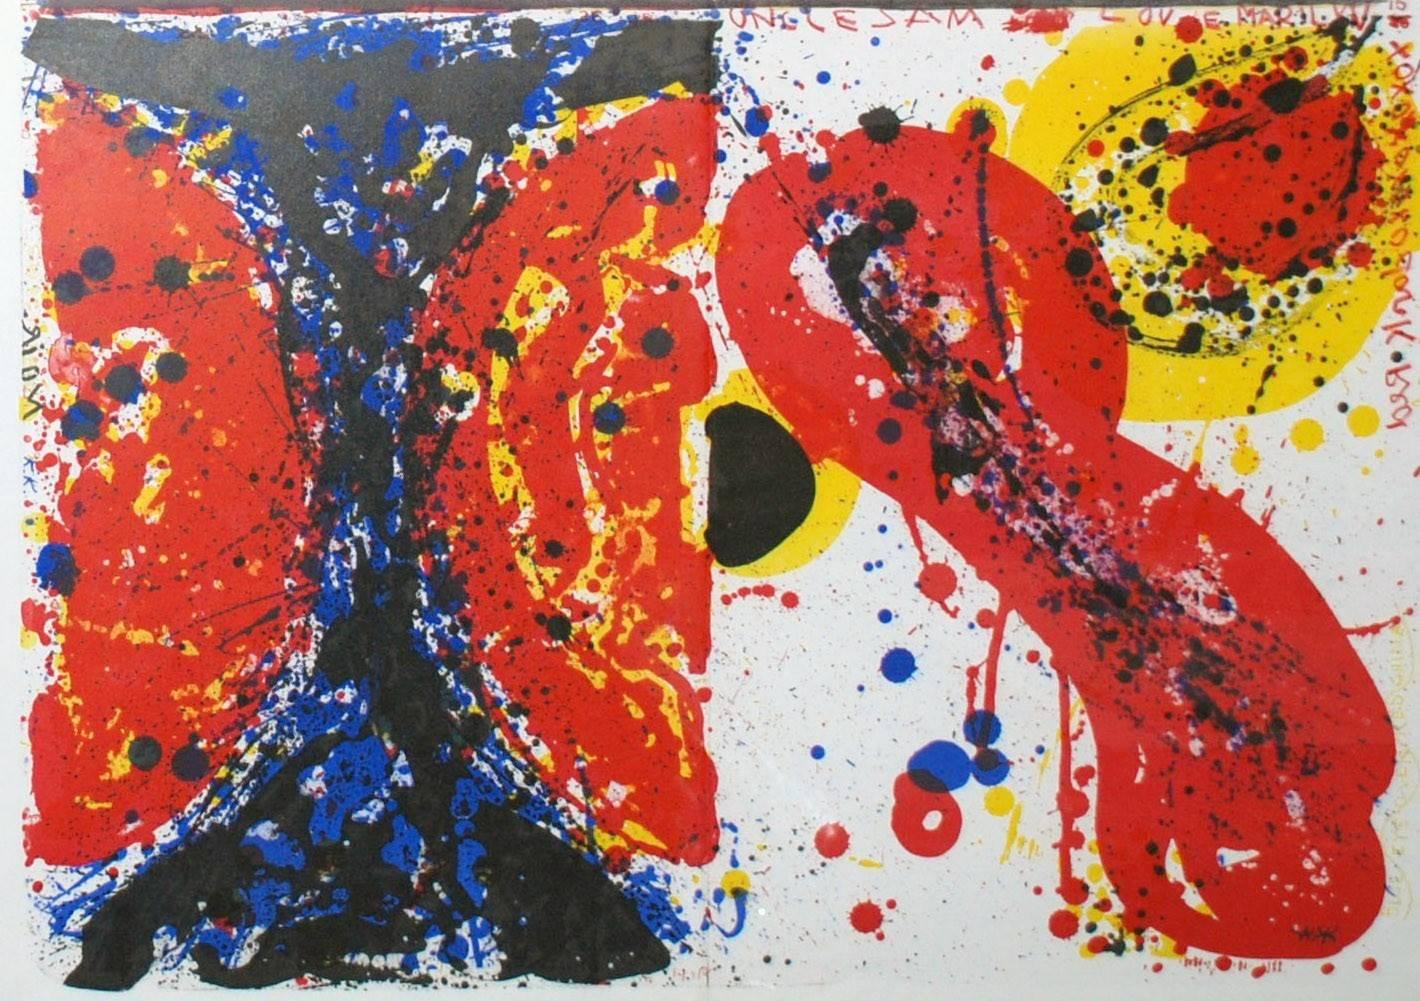 1¢ Life and Uncle Sam Loves Marilyn - Print by Sam Francis